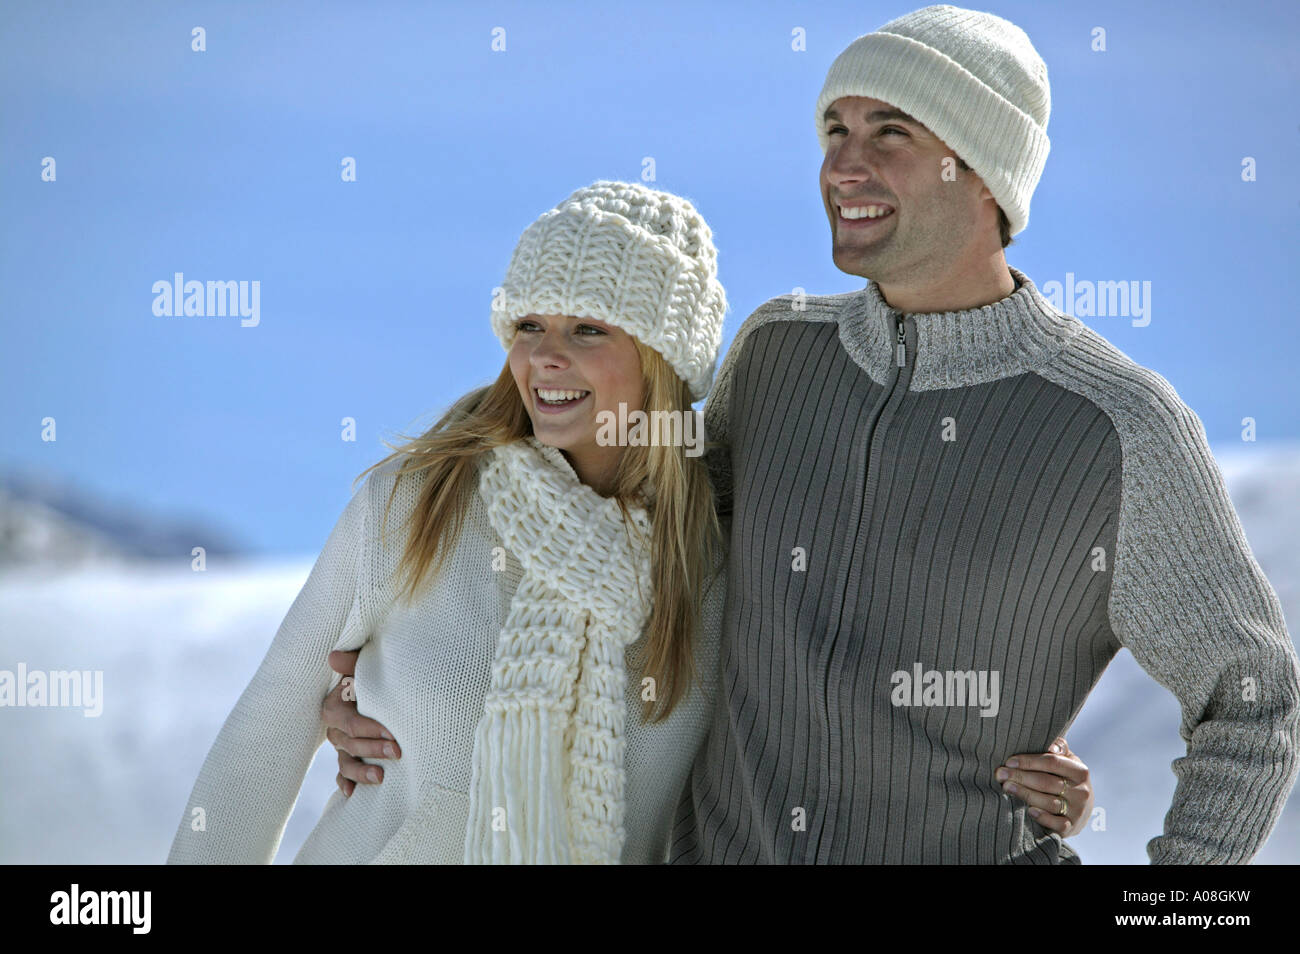 Junges Paar bei einem Winterspaziergang, young couple walking in winter landscape Stock Photo